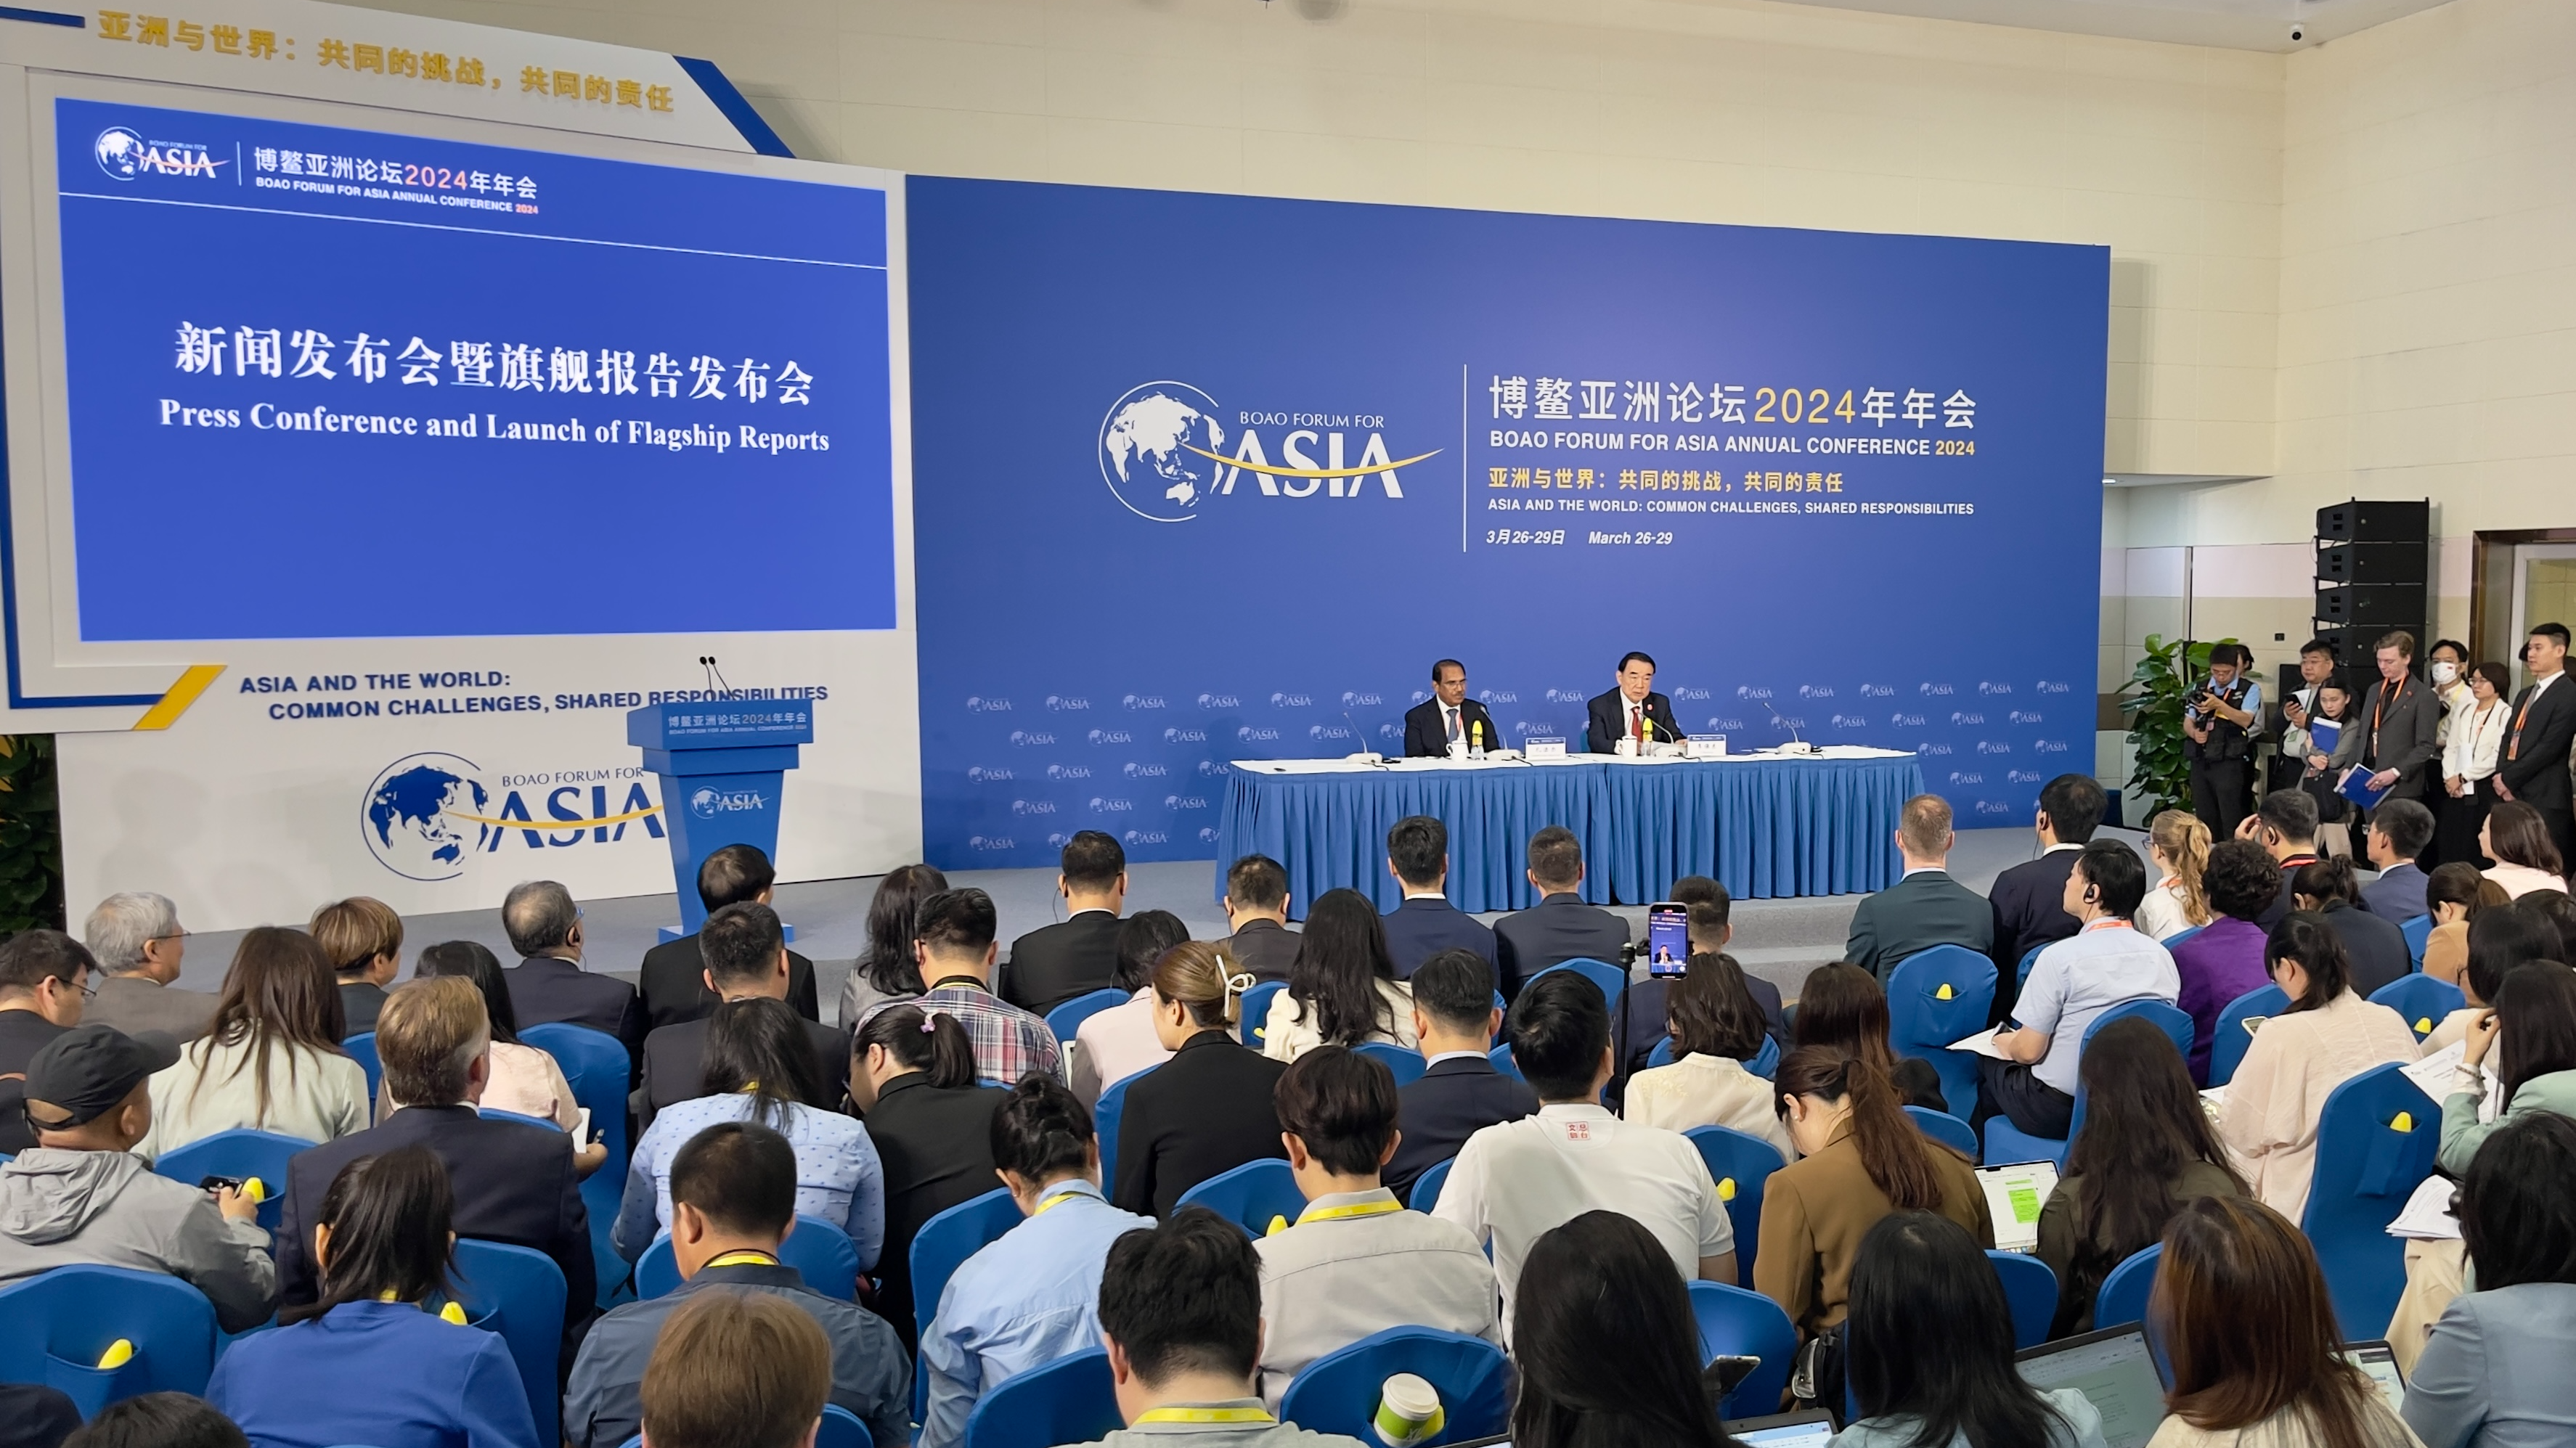 BFA Annual Conference 2024 takes place in  
south China's Hainan Province. Li Baodong, secretary-general of the Boao Forum for Asia, delivers a speech at the conference, March 26, 2024. /CMG